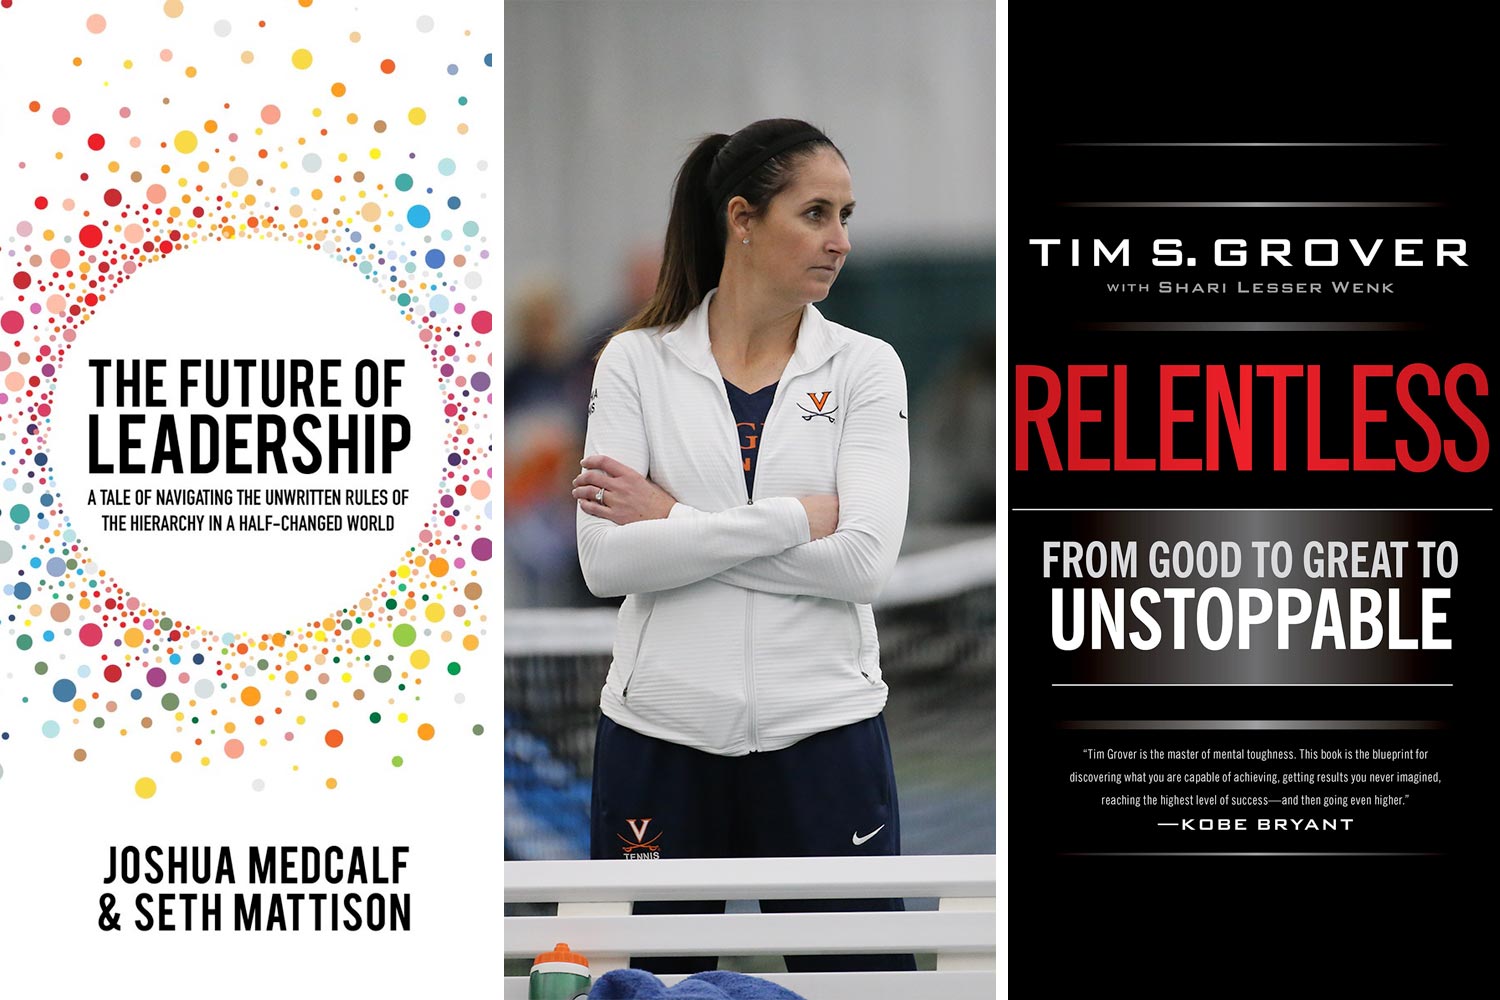 Left: The Future of Leadership a tale of navigating the unwritten rules of the hierarchy in a half-changed world Joshua medcalf and seth mattison Middle: Sara O’Leary crossing her arms watching her team.  Right: book cover that reads: Relentless from good to great to unstoppable